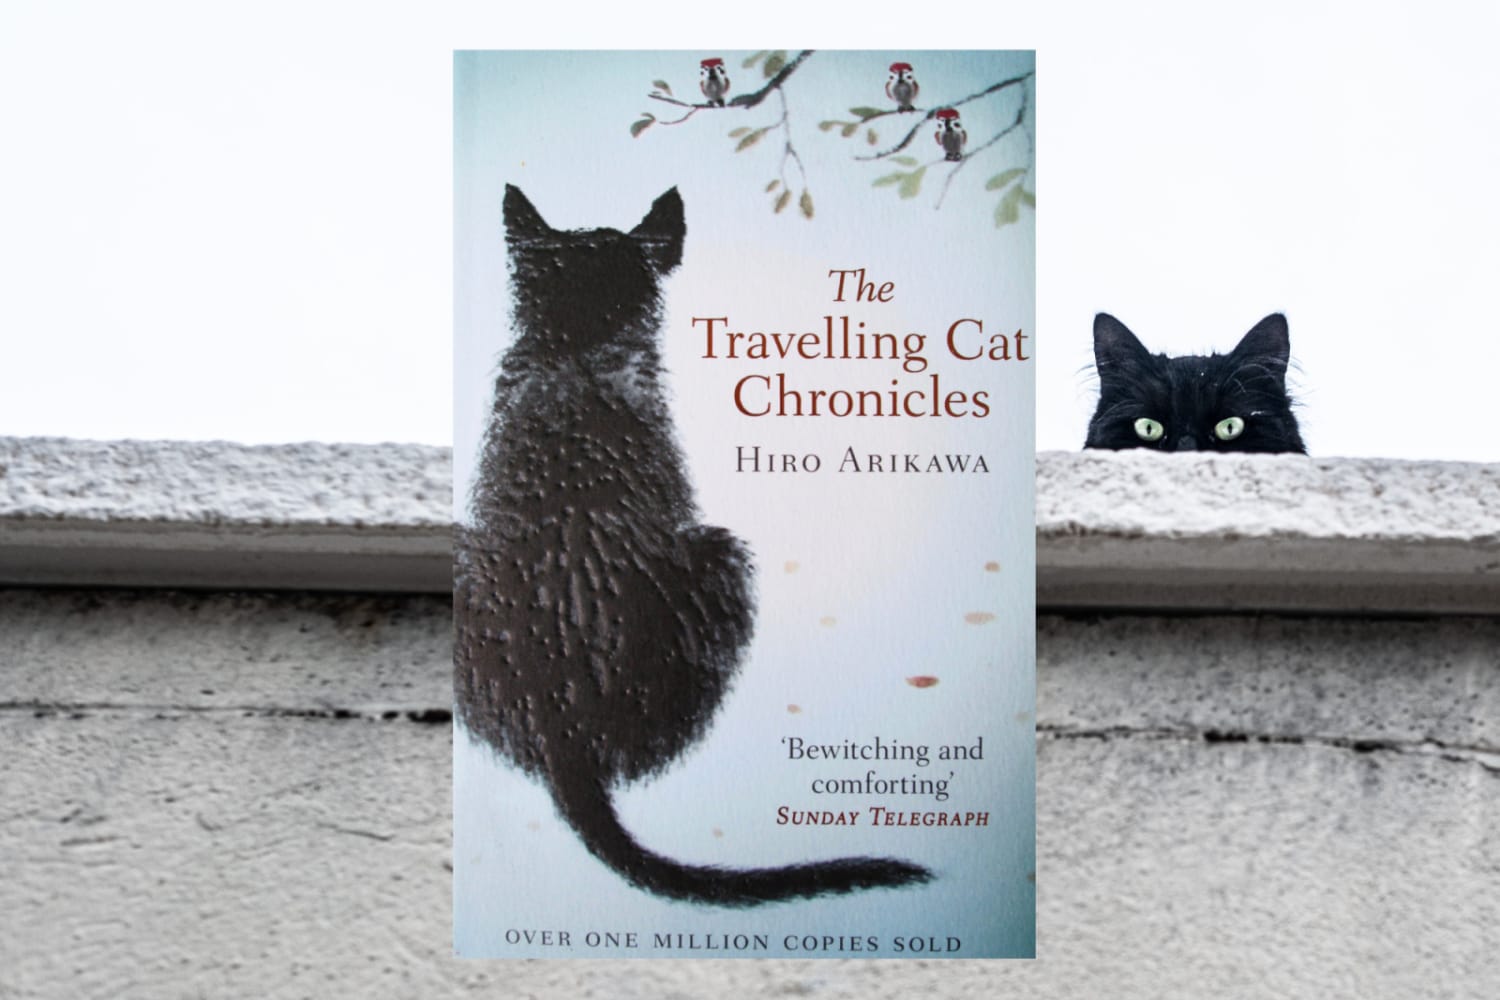 Book cover shows the illustration of a black cat - it's back to the reader.